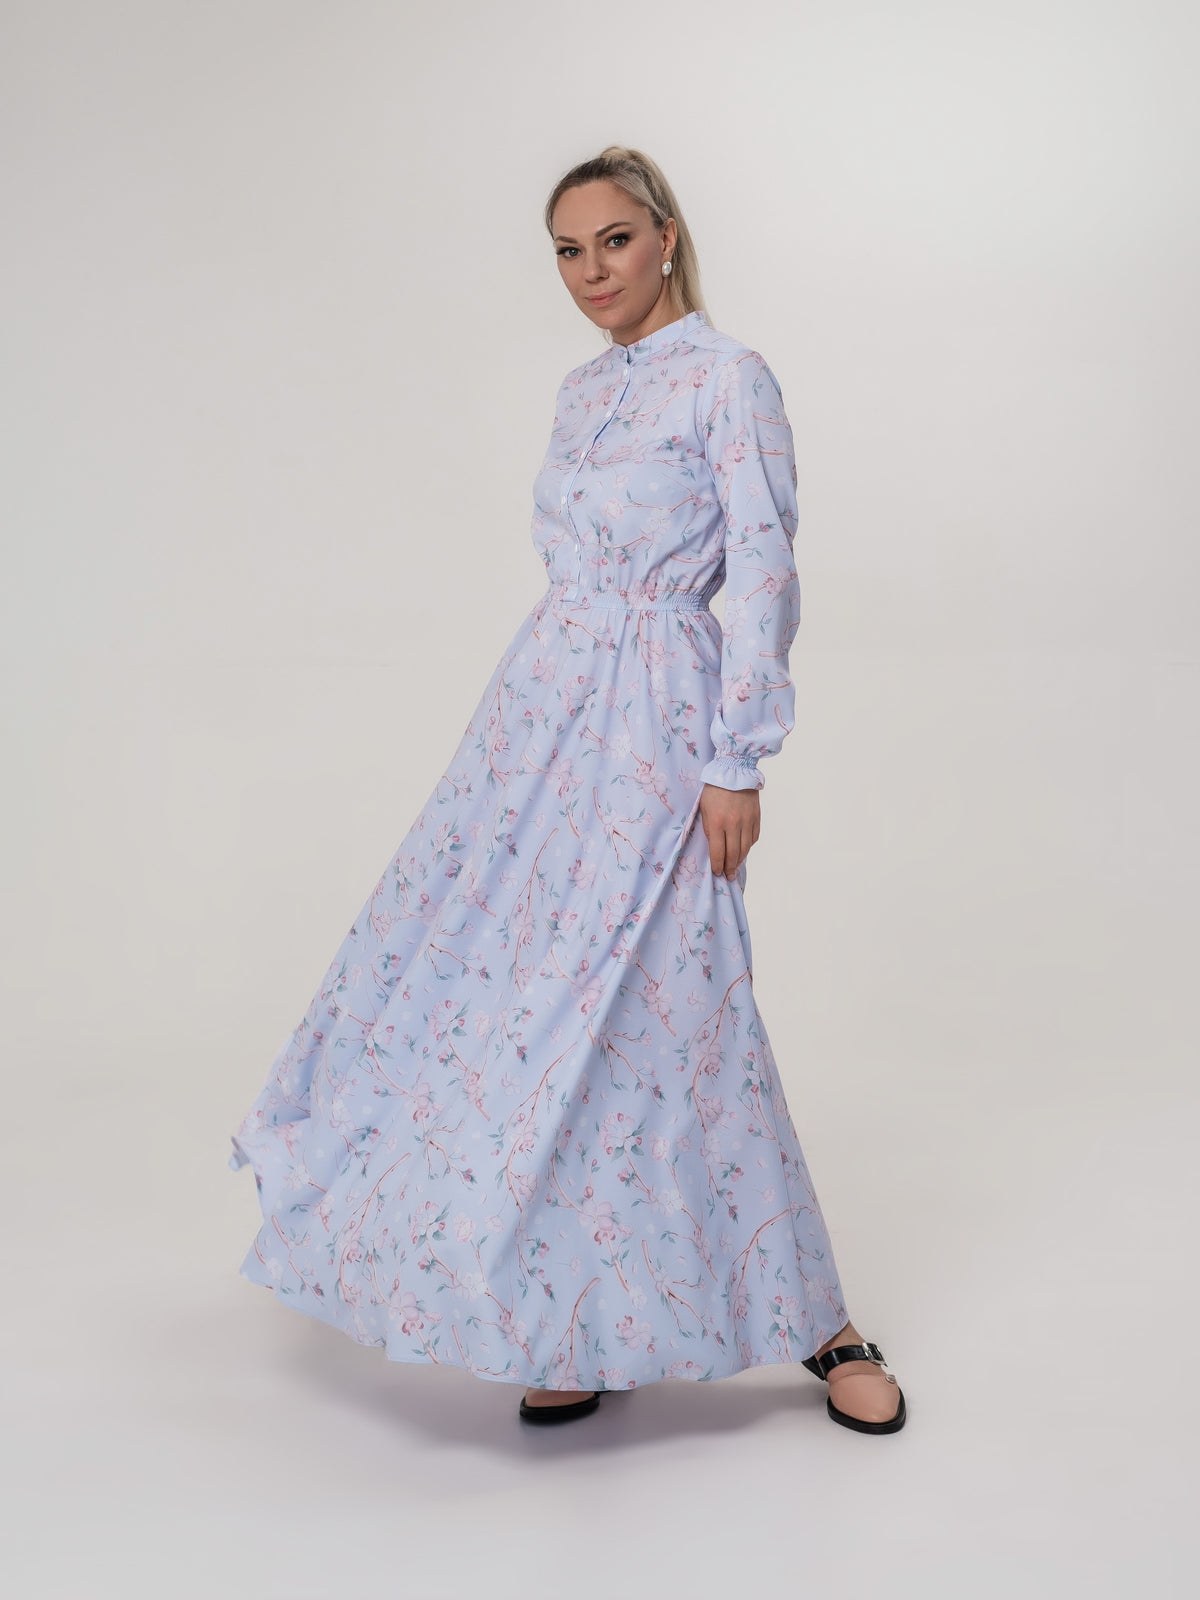 Long dress with our "Apple Blossoms" print